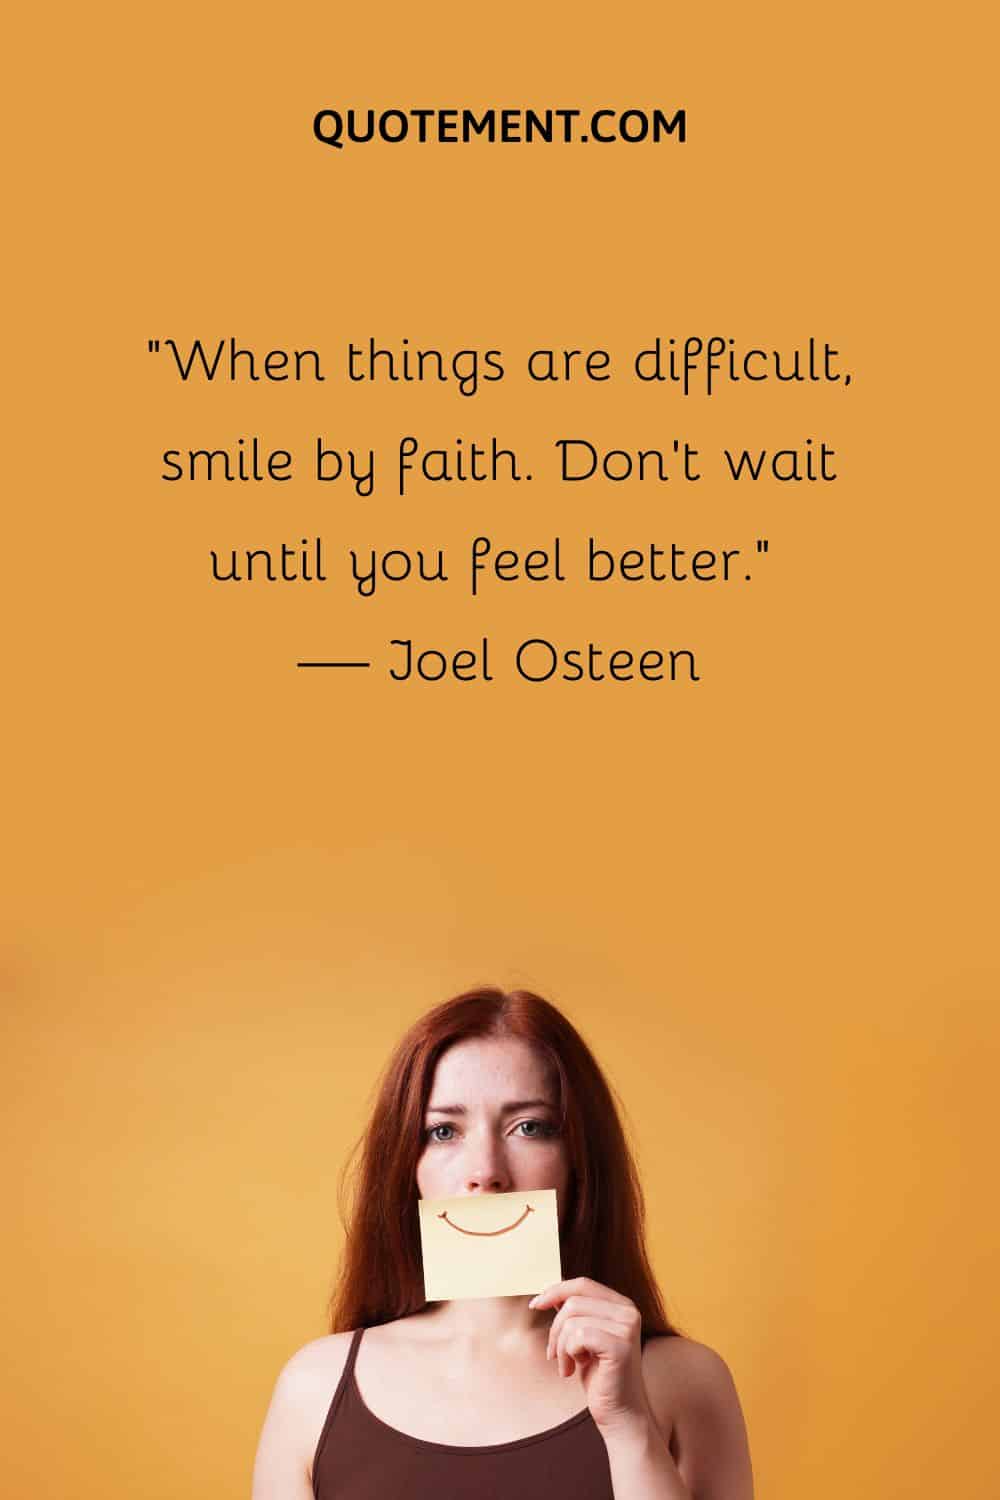 When things are difficult, smile by faith. Don’t wait until you feel better